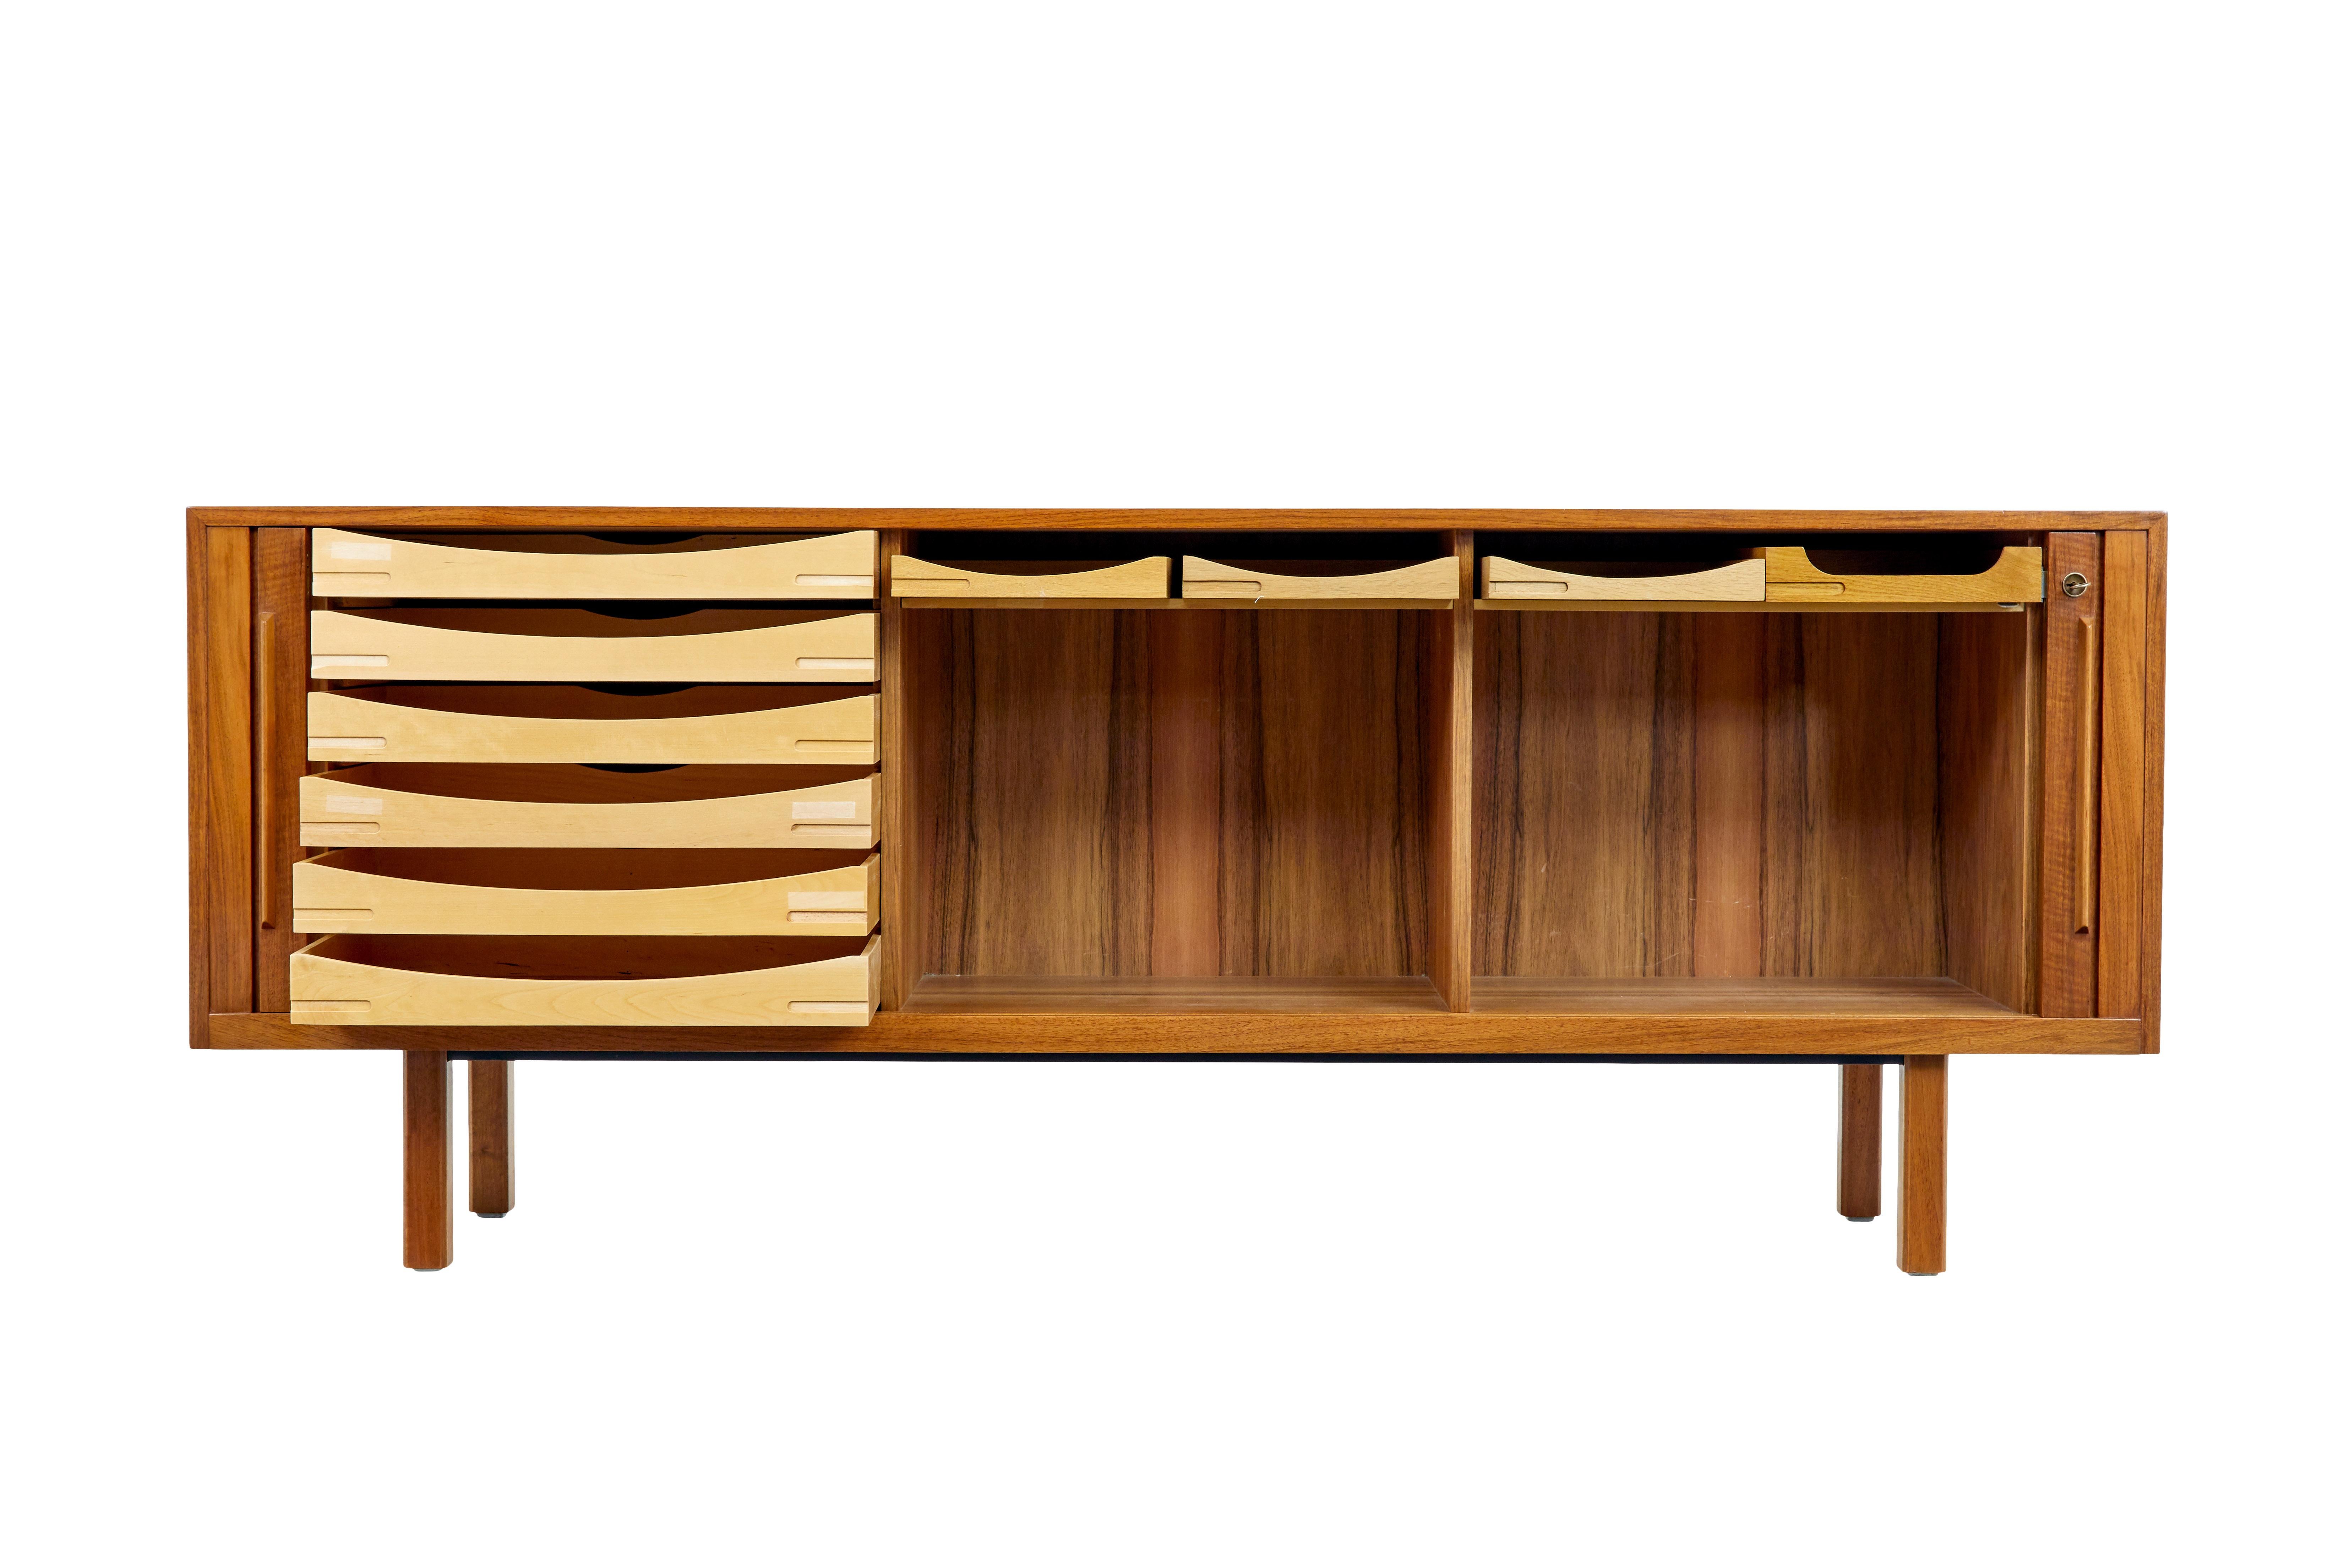 Hand-Crafted 20th century Swedish teak tambour front sideboard by Atvidabergs For Sale